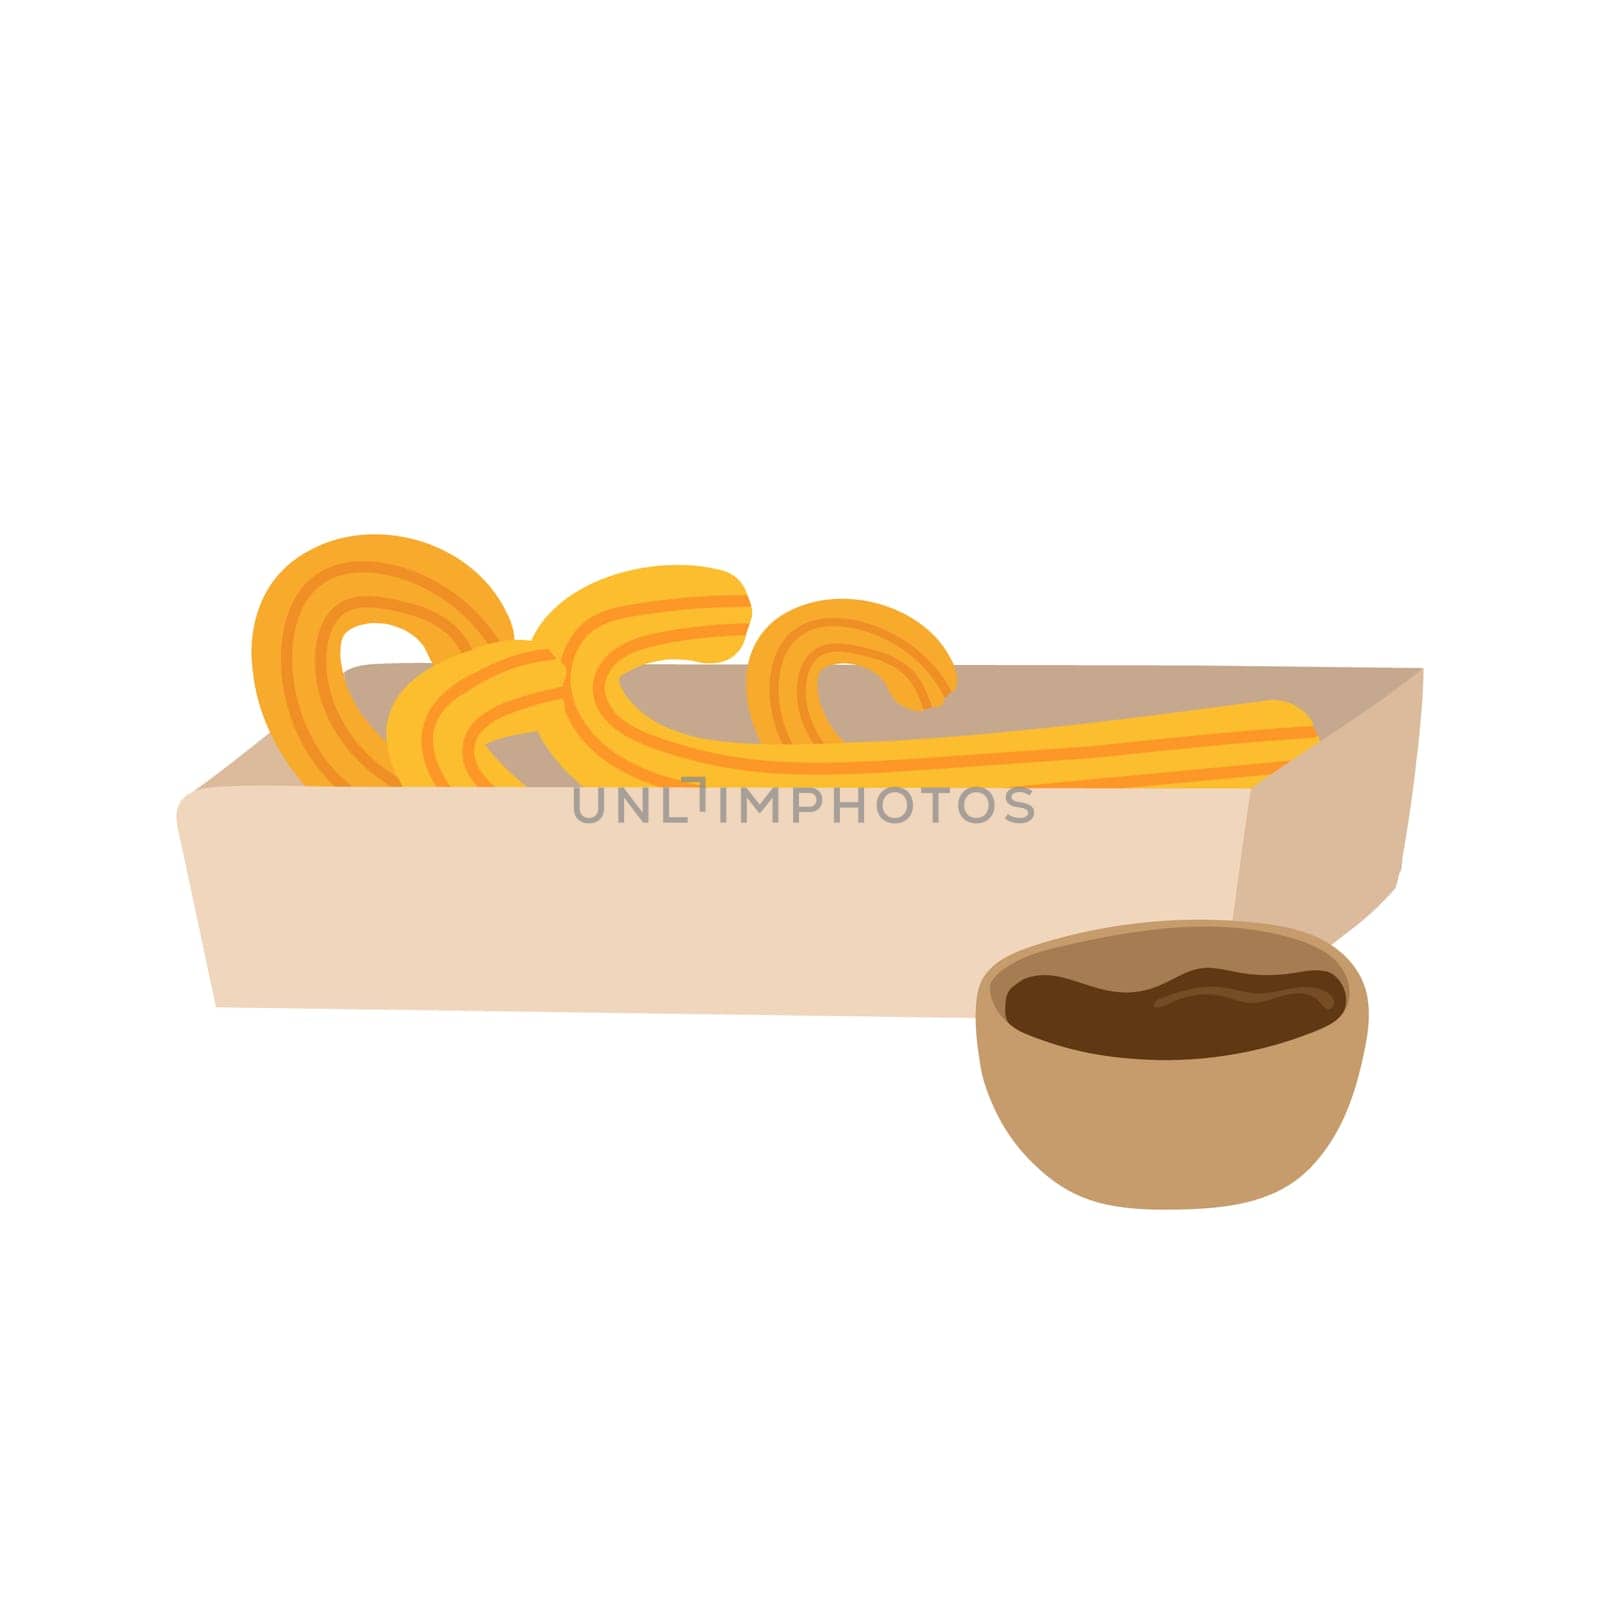 Sweet homemade churros in paper packaging with chocolate dipping sauce. Delicious Mexican snack. Flat vector design for cafe menu or poster